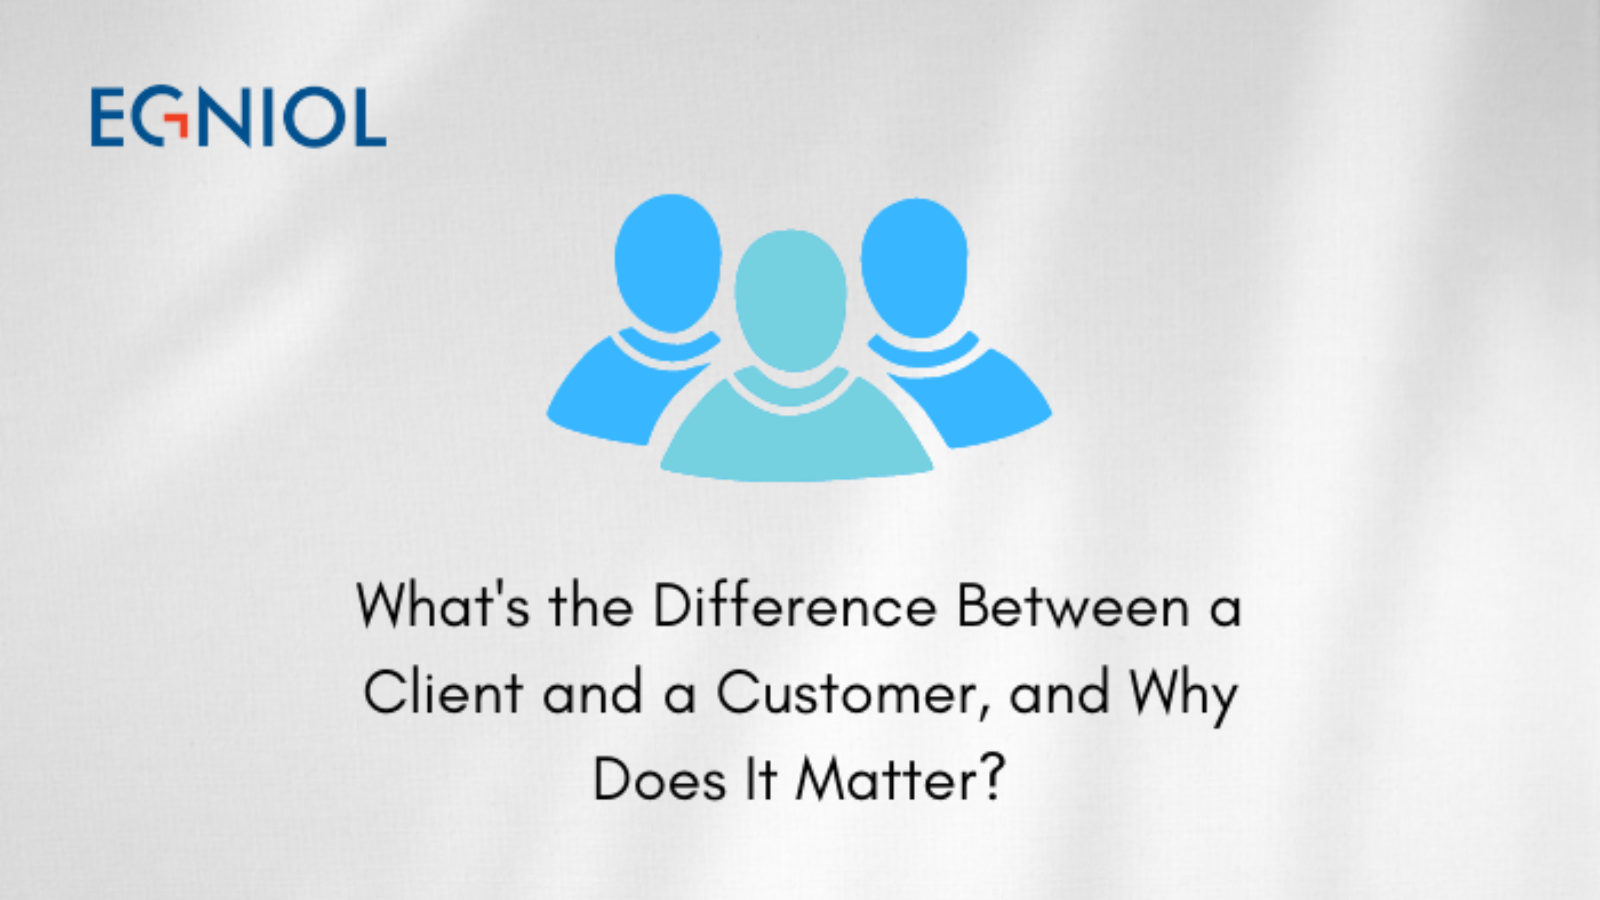 What's the Difference Between a Client and a Customer, and Why Does It Matter? - By Egniol